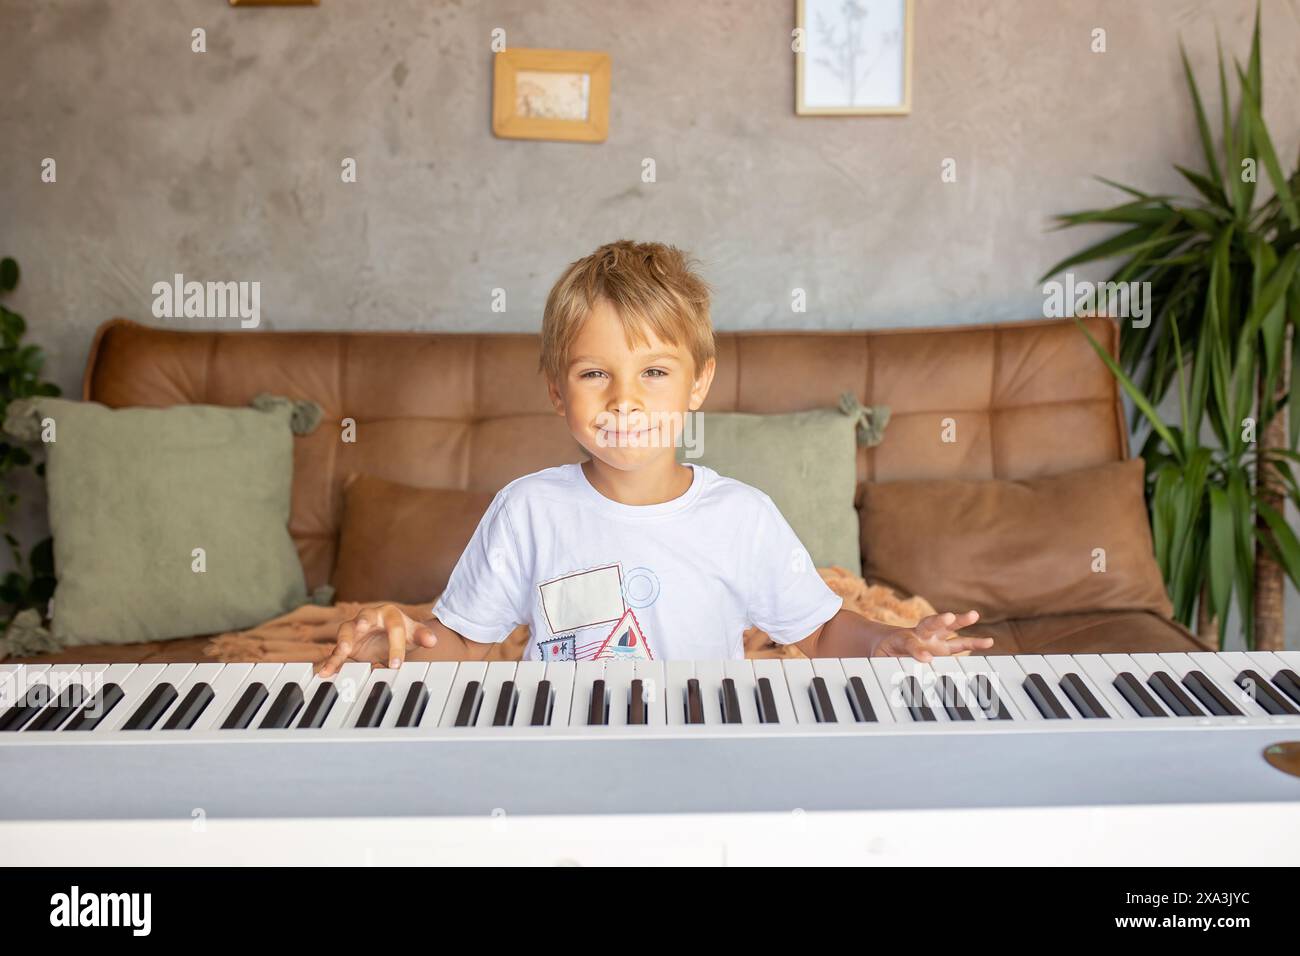 Child, blond boy, playing piano at home, learning Stock Photo